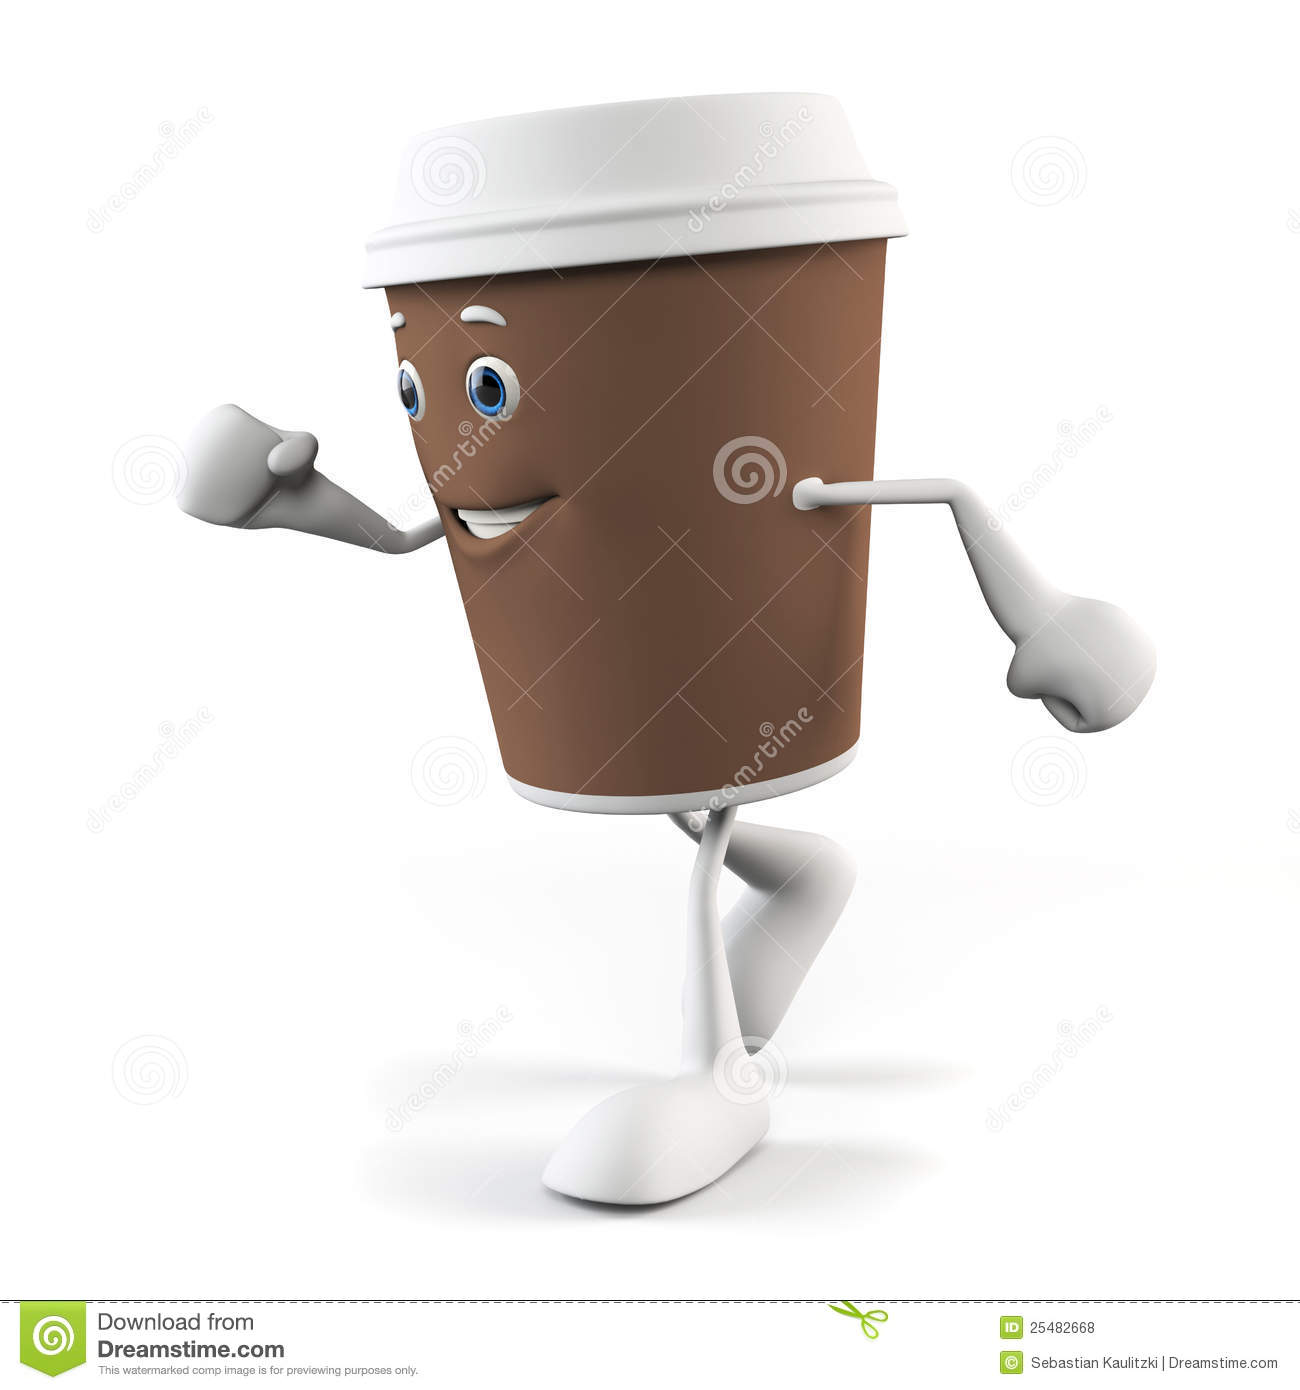 Funny Coffee Cup Royalty Free Stock Photos   Image  25482668